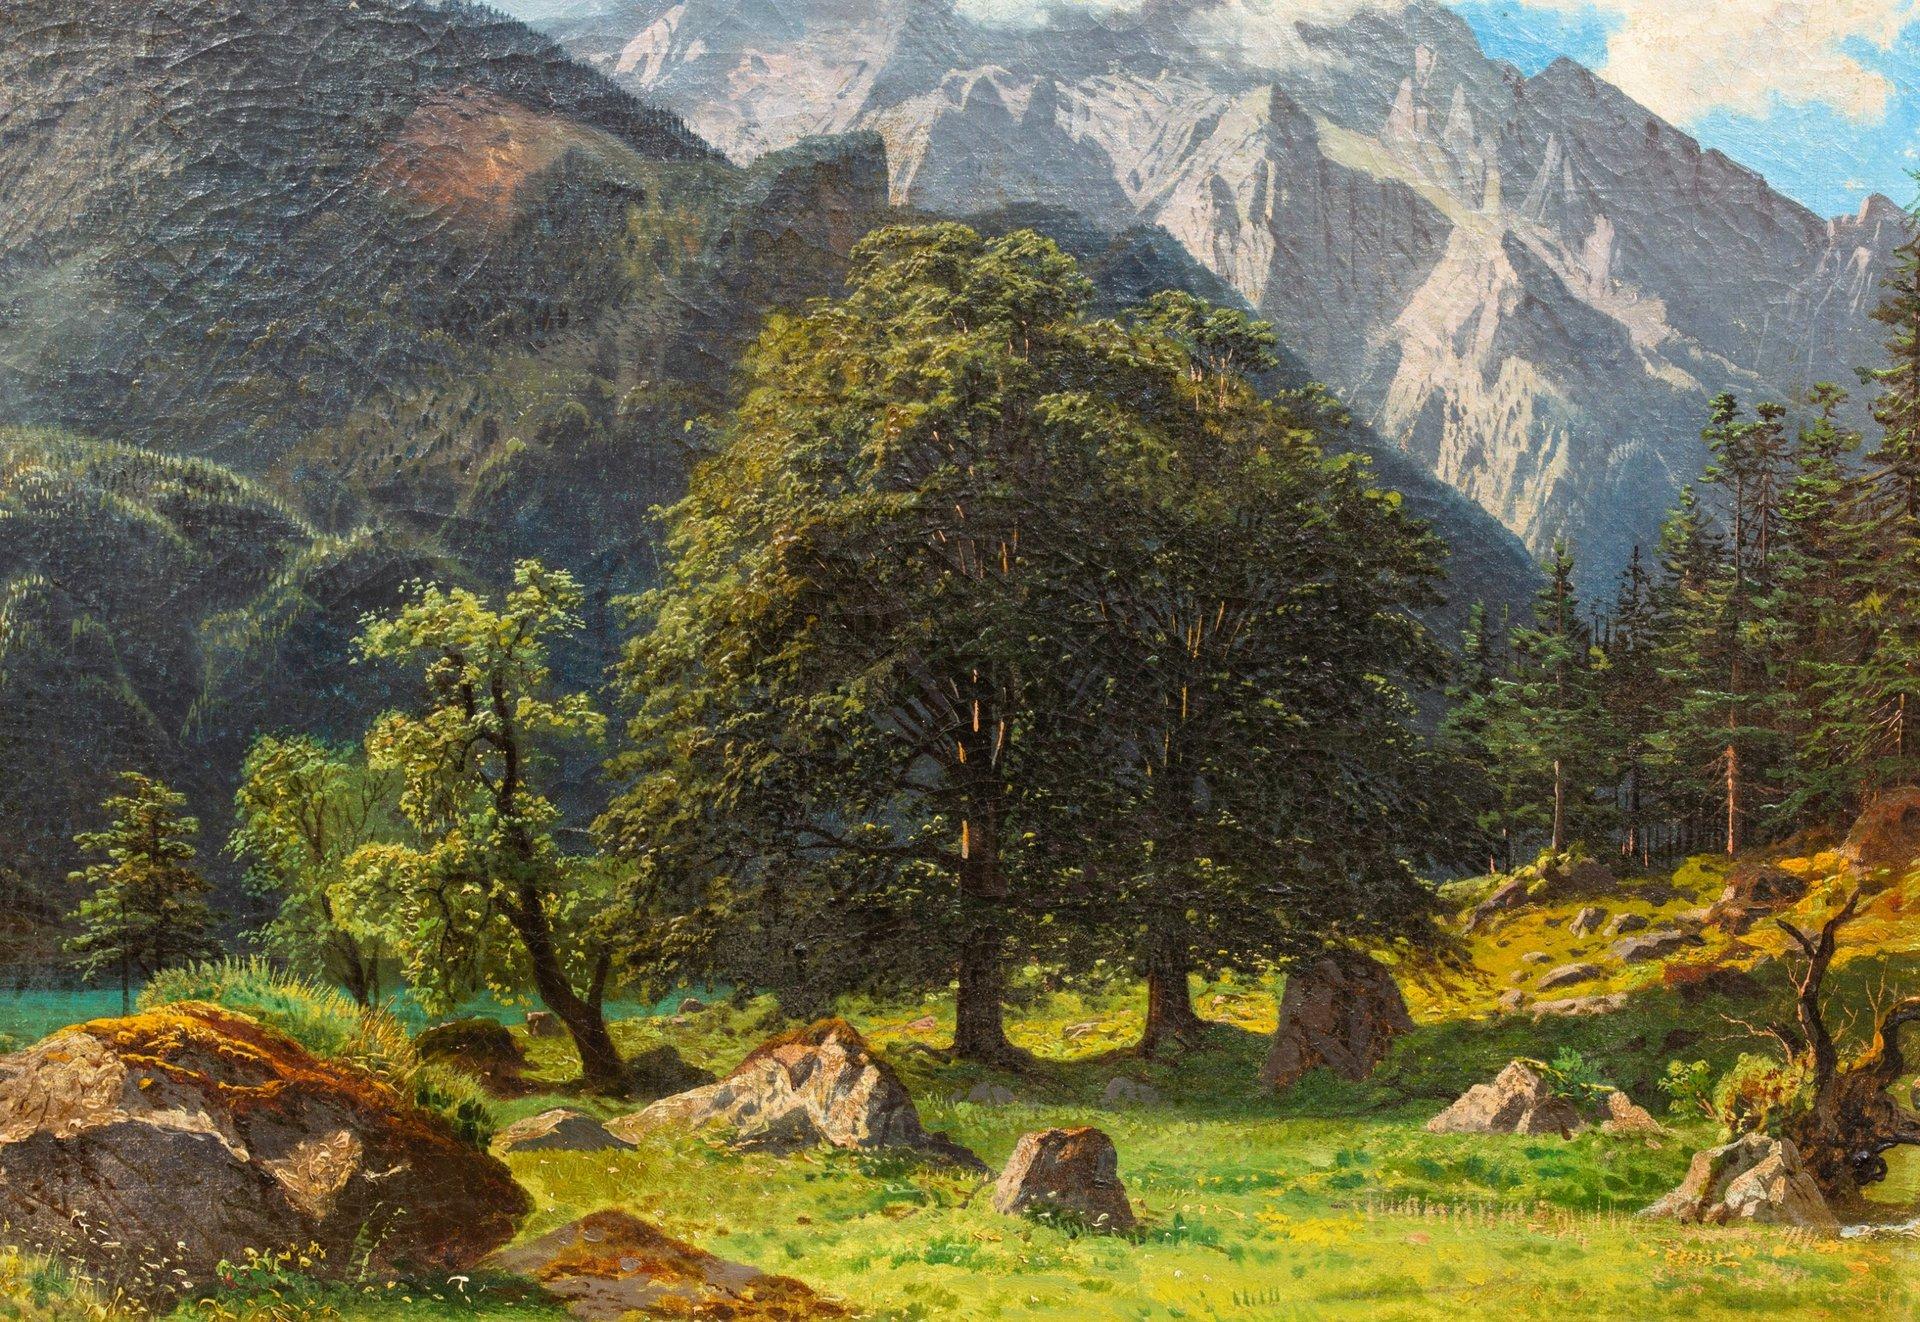 Obersee by François Roffiaen (1820-1898) Oil on canvas For Sale 4